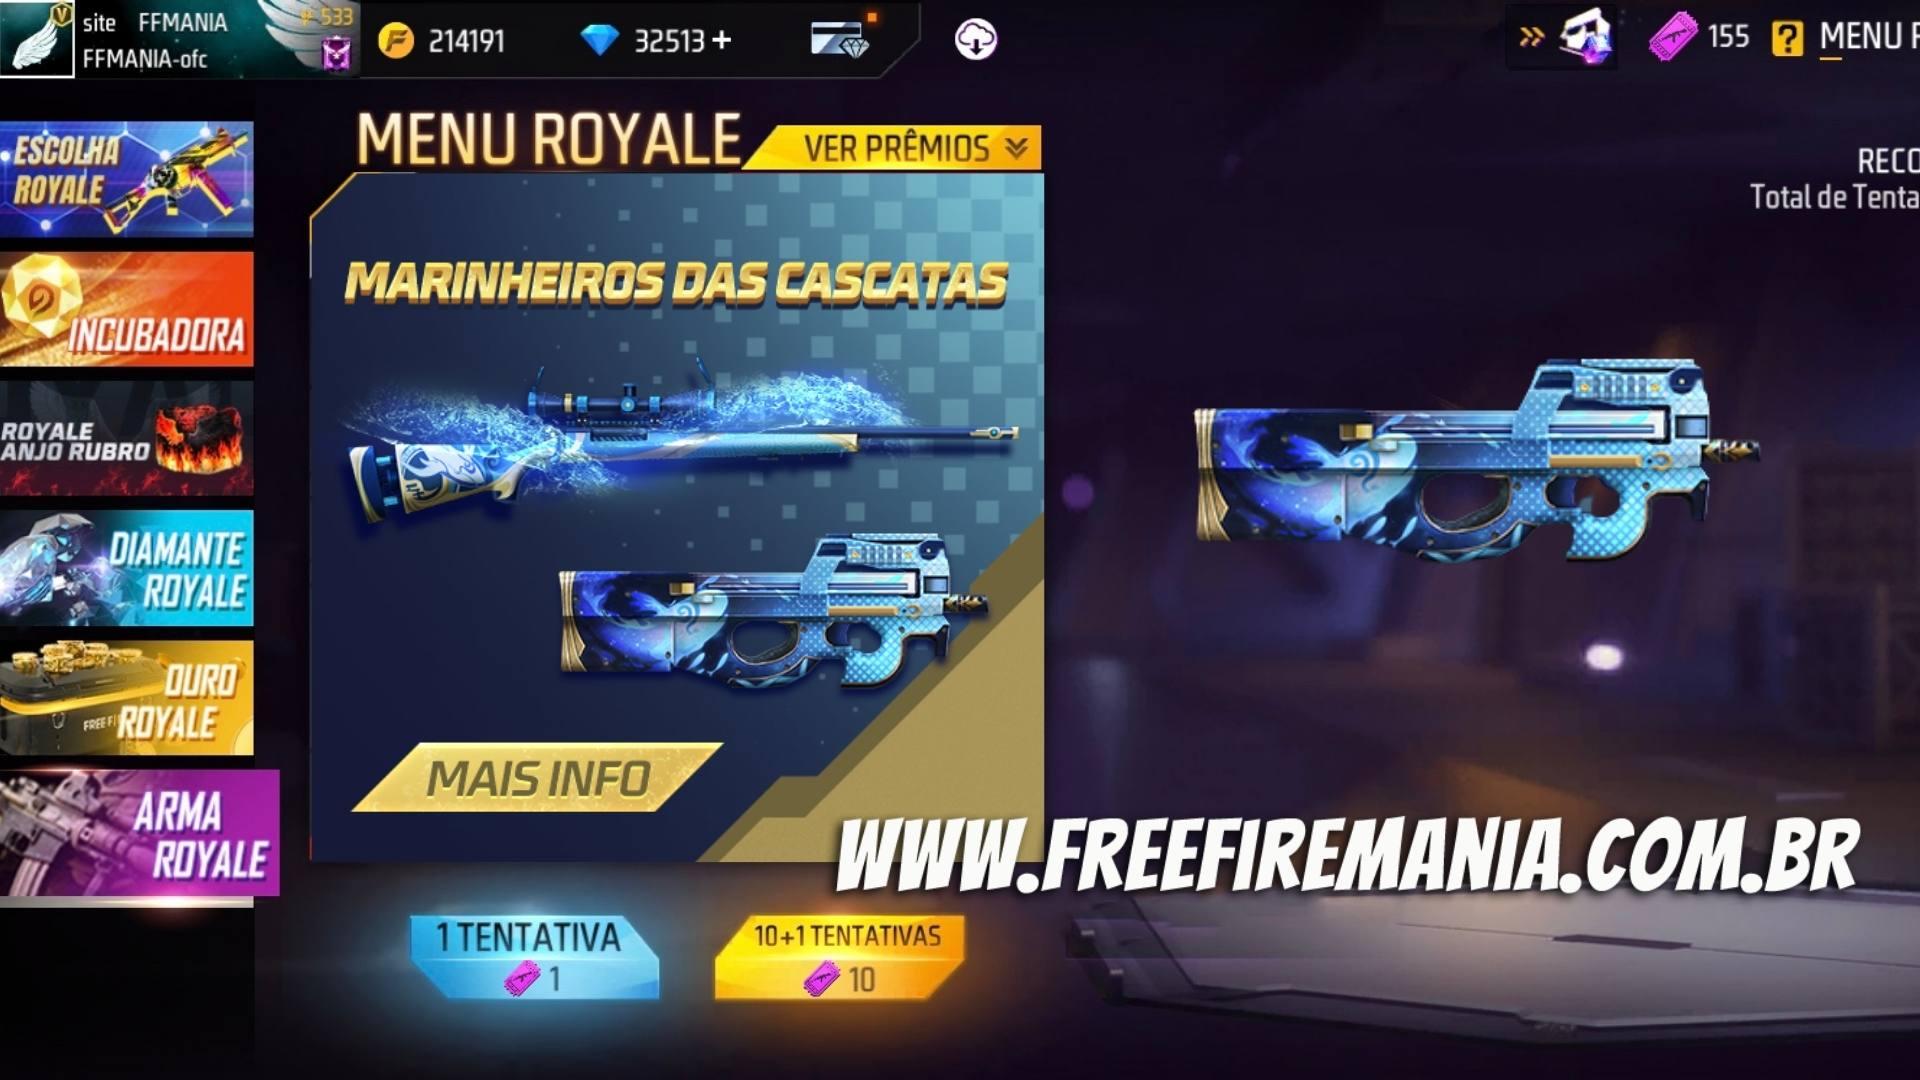 Free Fire: Arma Royale with M24 and P90 Mariners das Cascades skins arrives in August